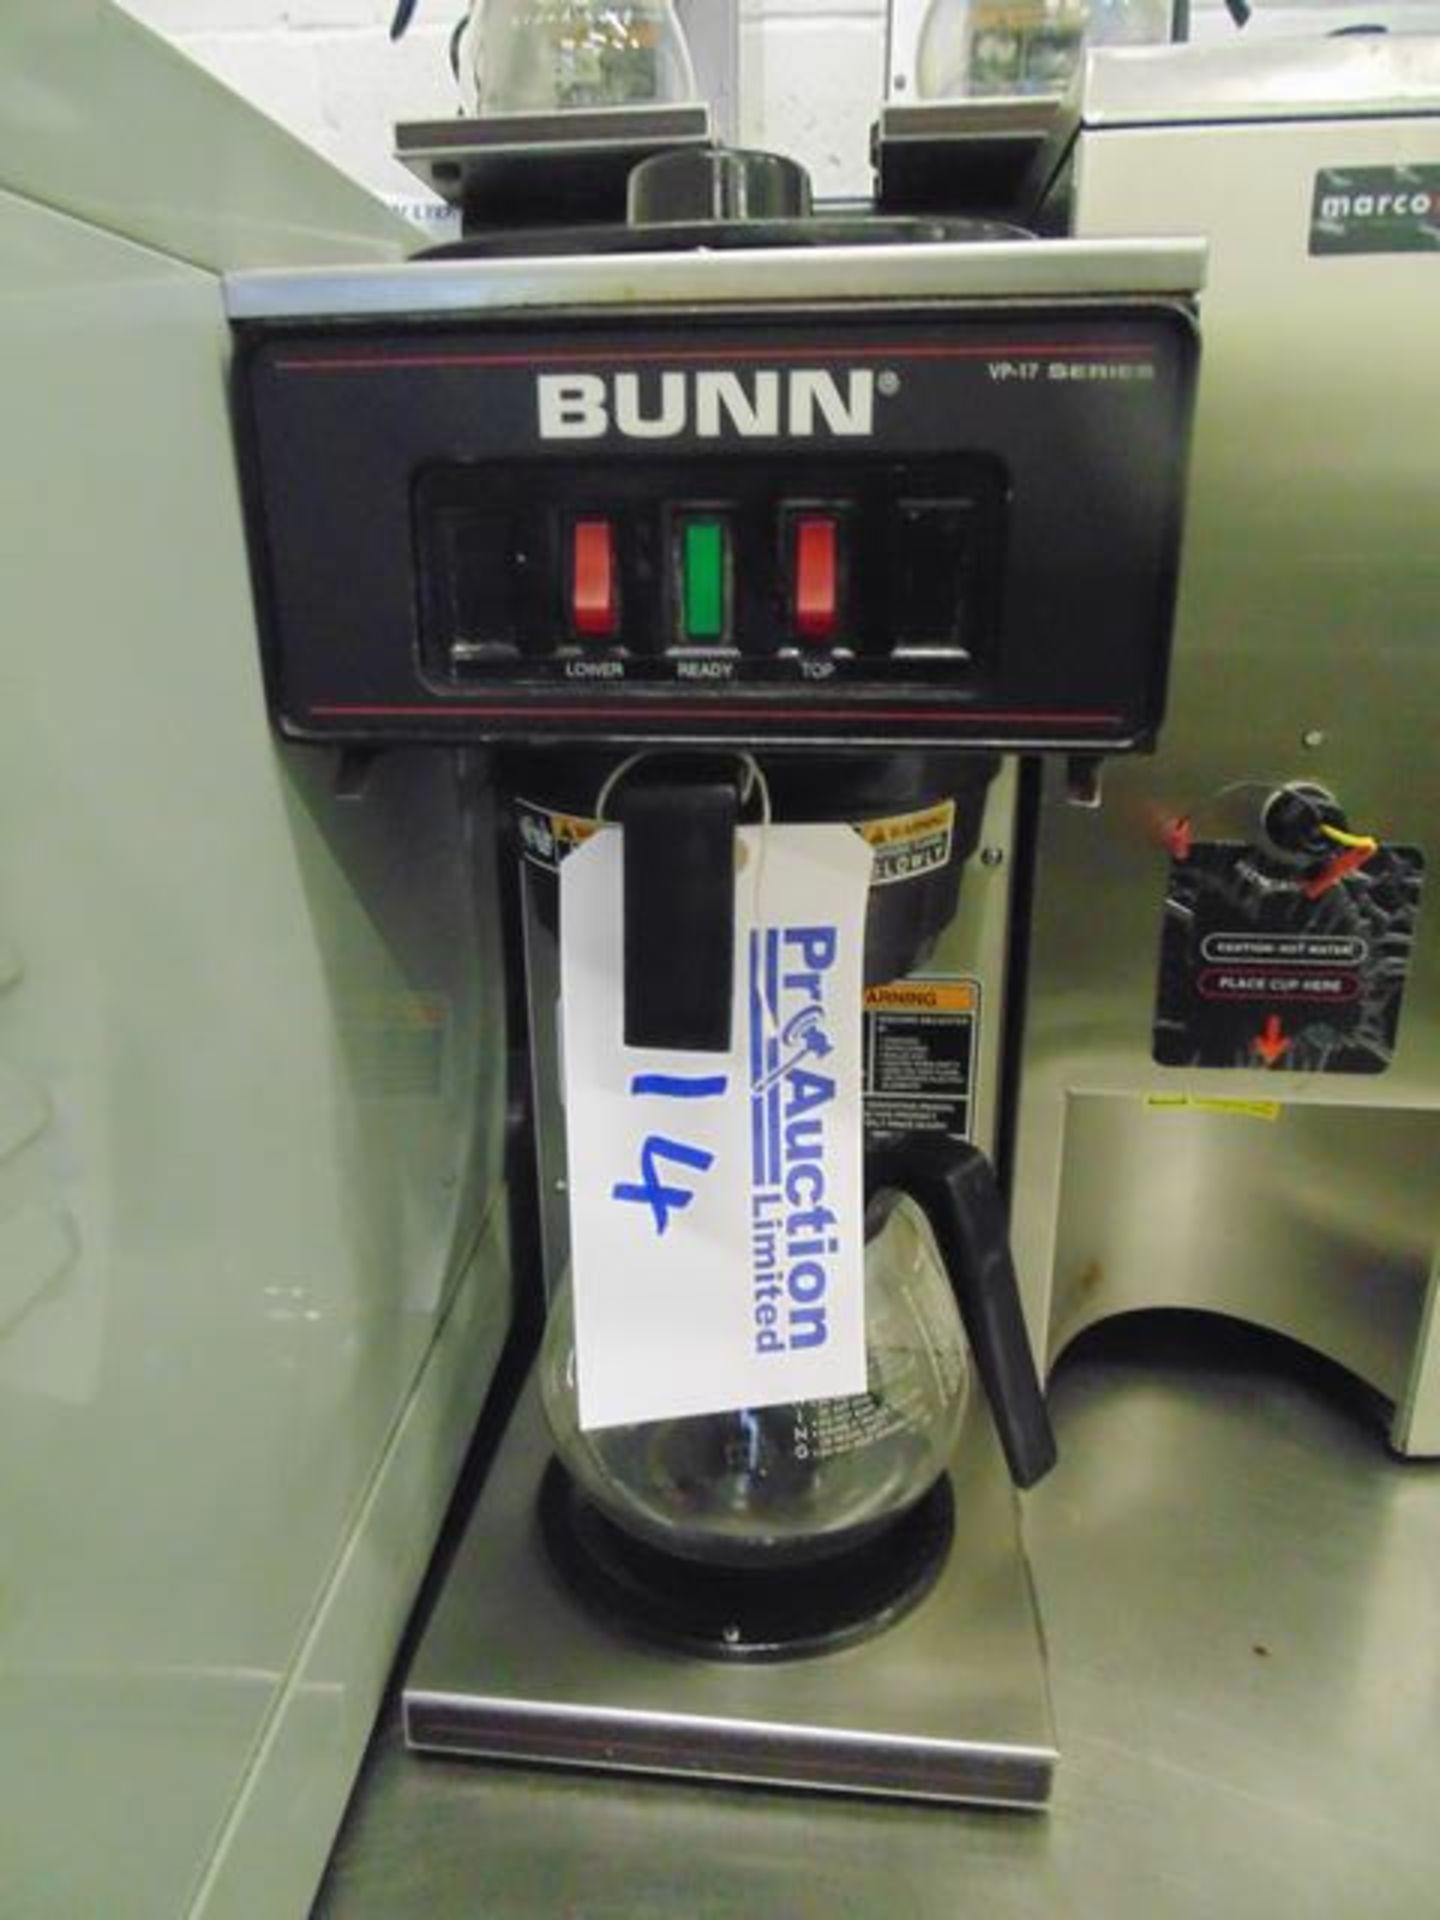 BUNN VP17A 2-warmers coffee brewer consistently brews perfect coffee all stainless steel